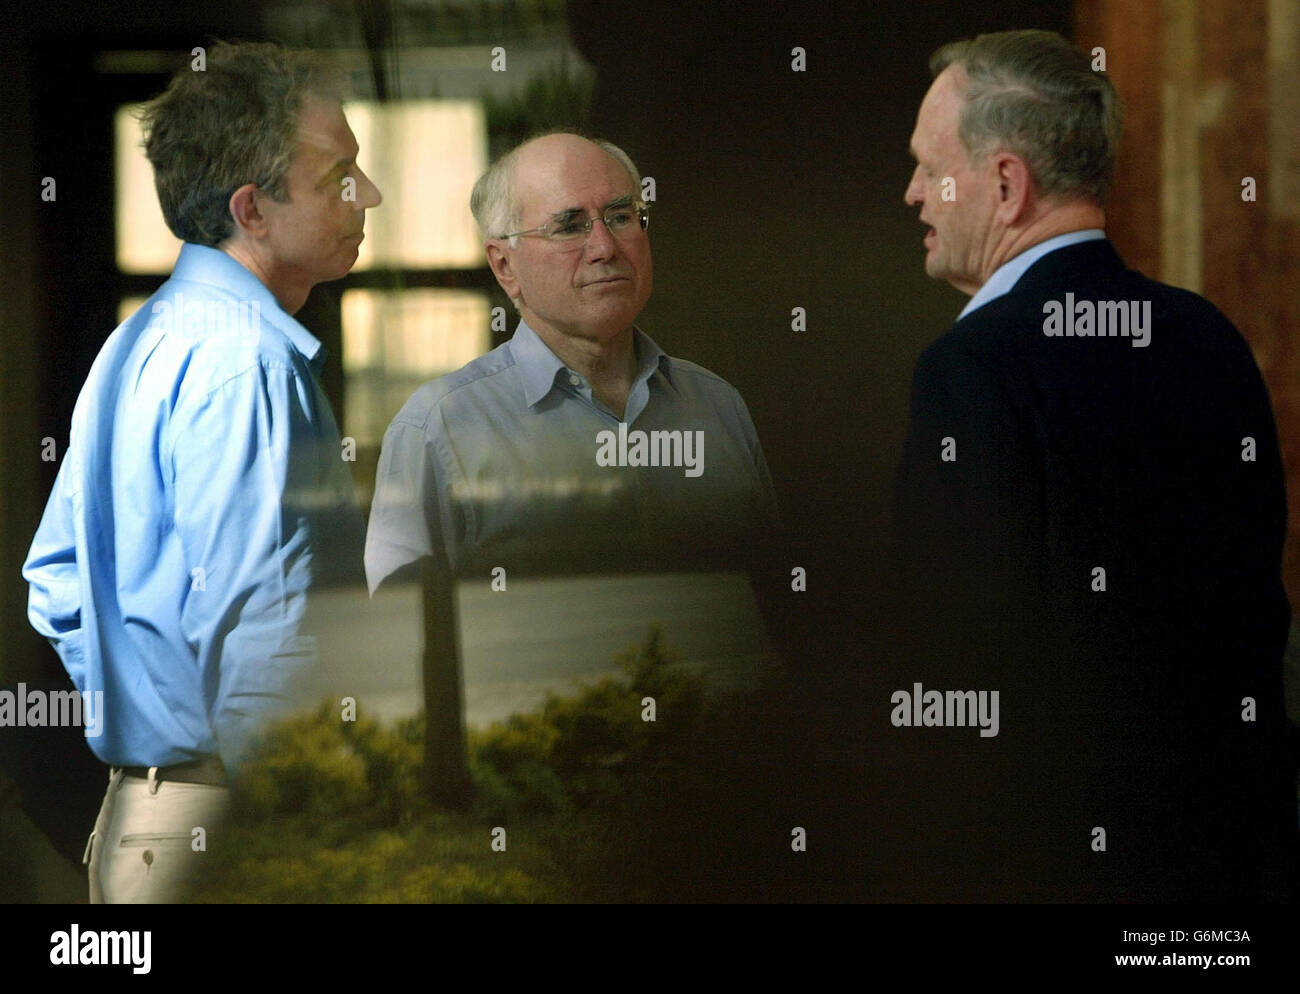 British Prime Minister Tony Blair (L) talks with Canada's Prime Minister Jean Chretien (R) and Australia's Prime Minister John Howard prior to the start of a meeting of leaders of Commonwealth countries in Abuja in Nigeria. The leaders are pictured behind window glass. Stock Photo